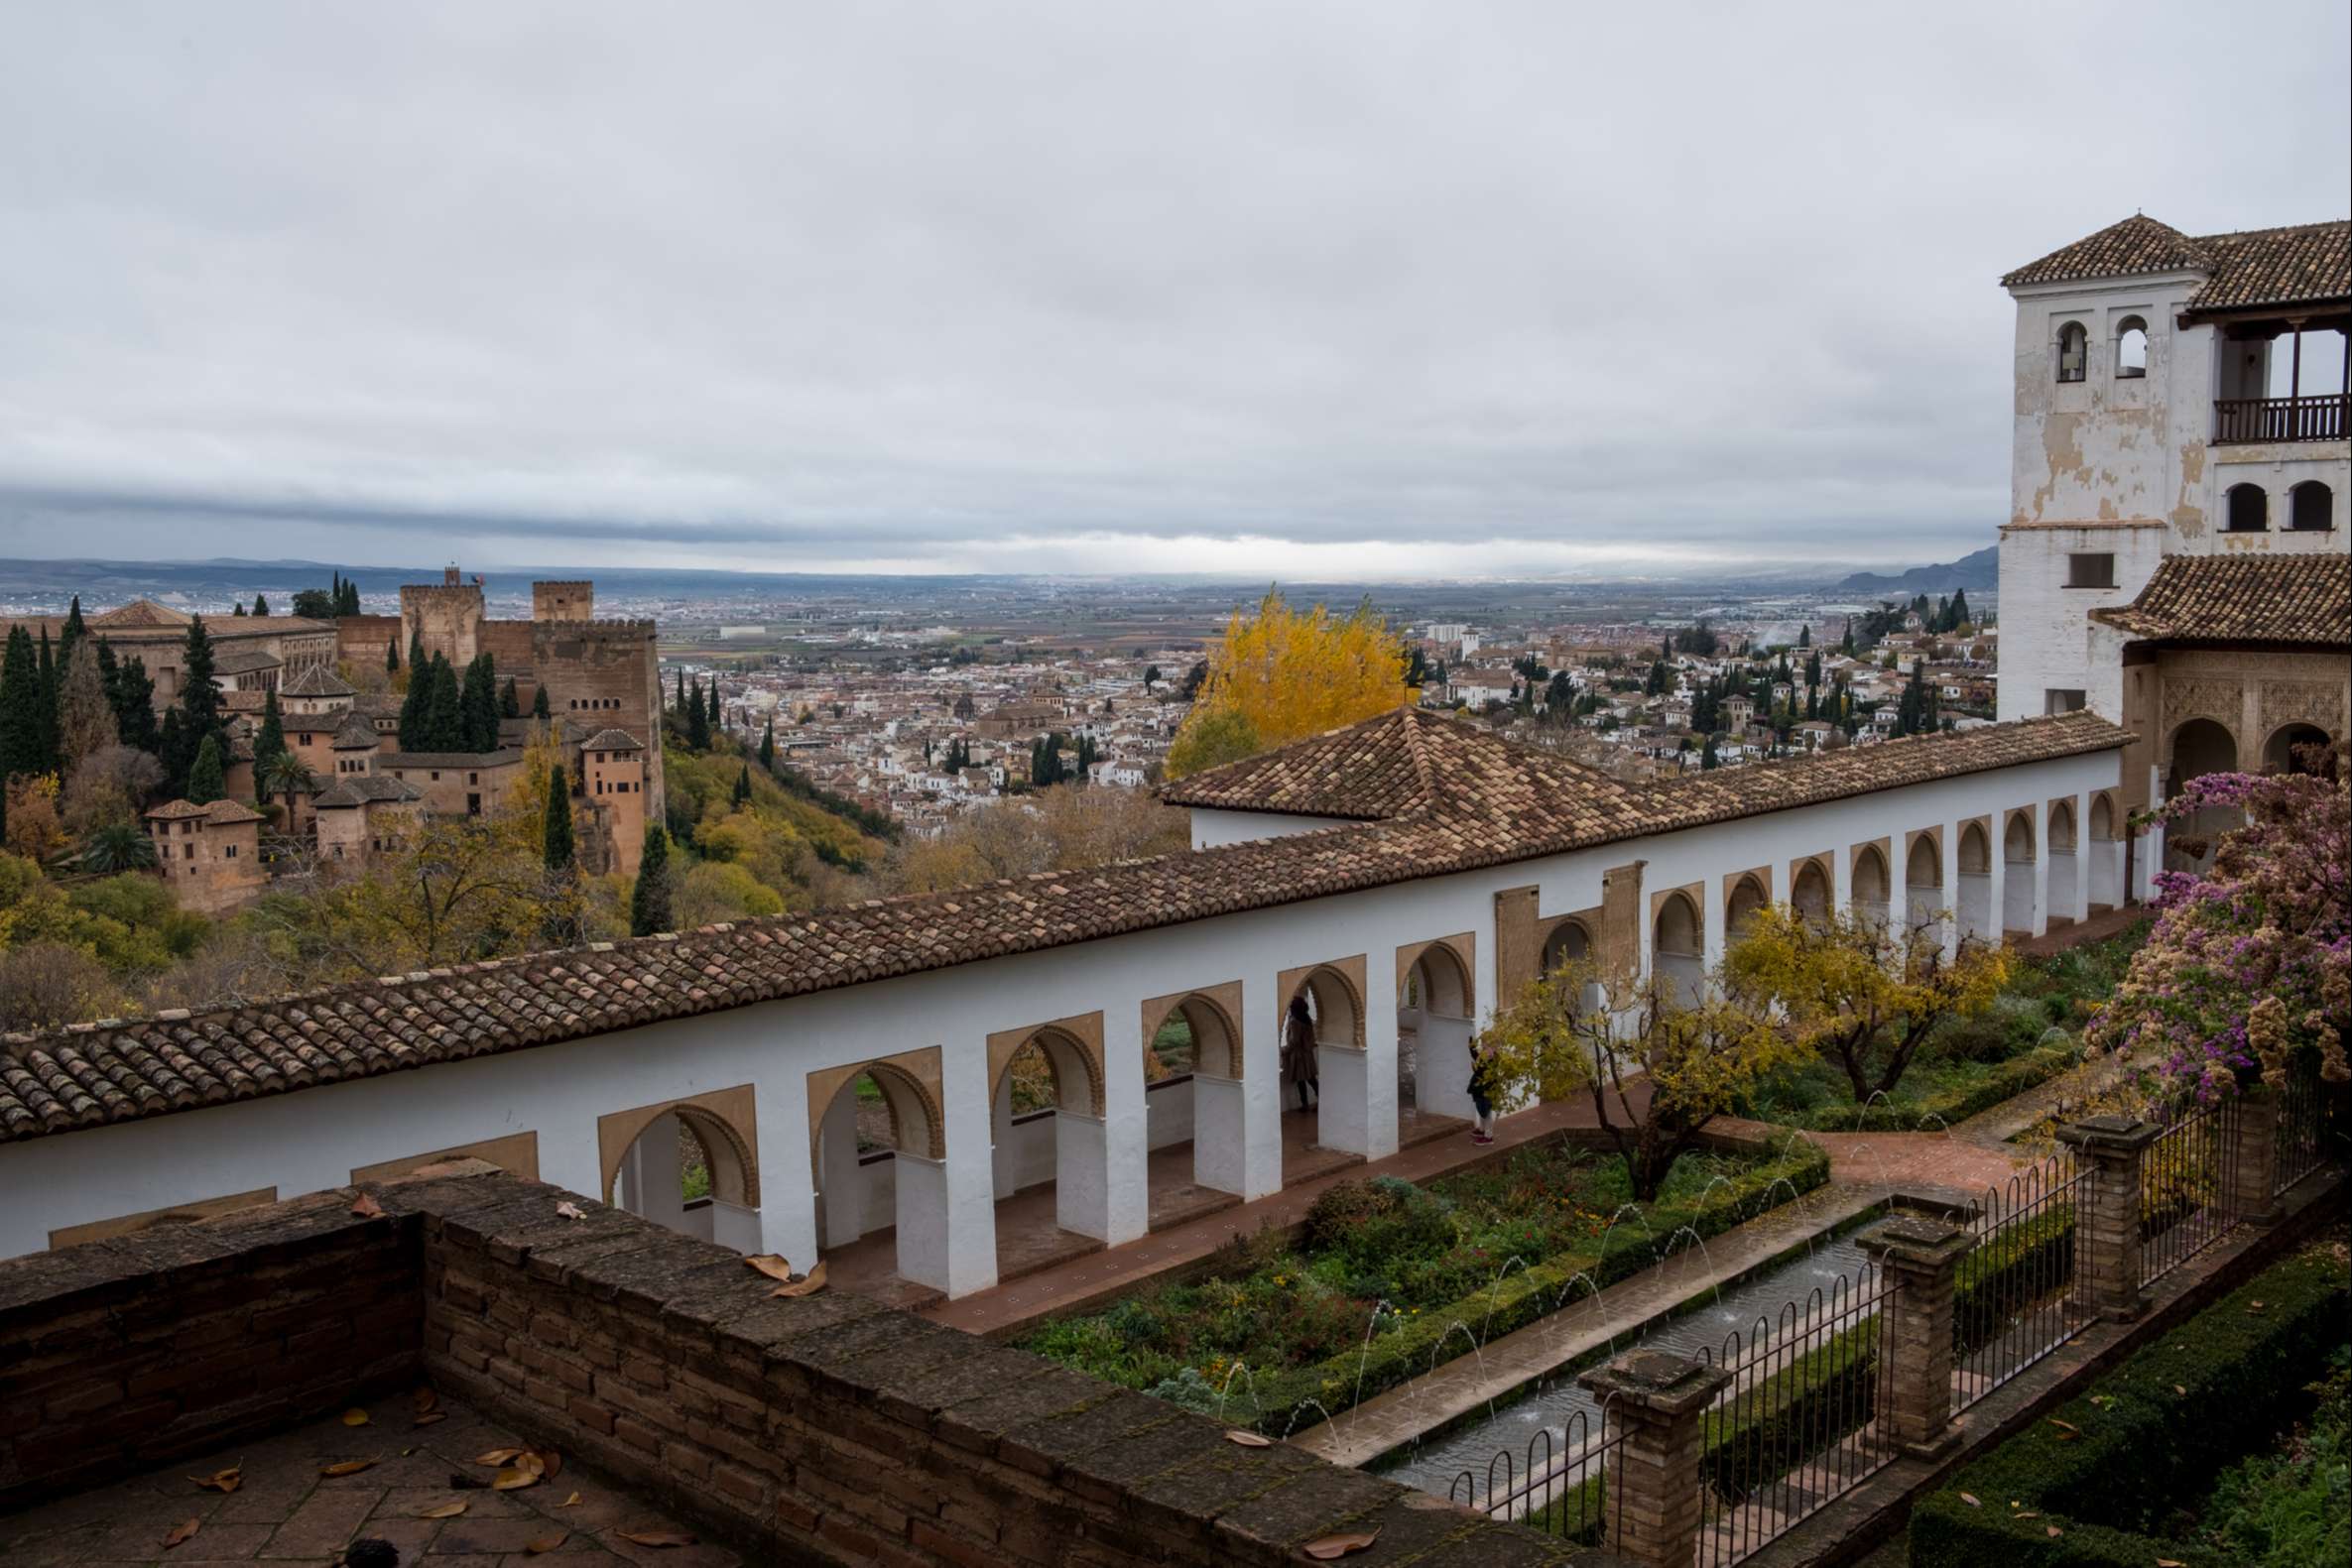 Nasrid Palace, Granada and Generalife Palace from The Alhambra